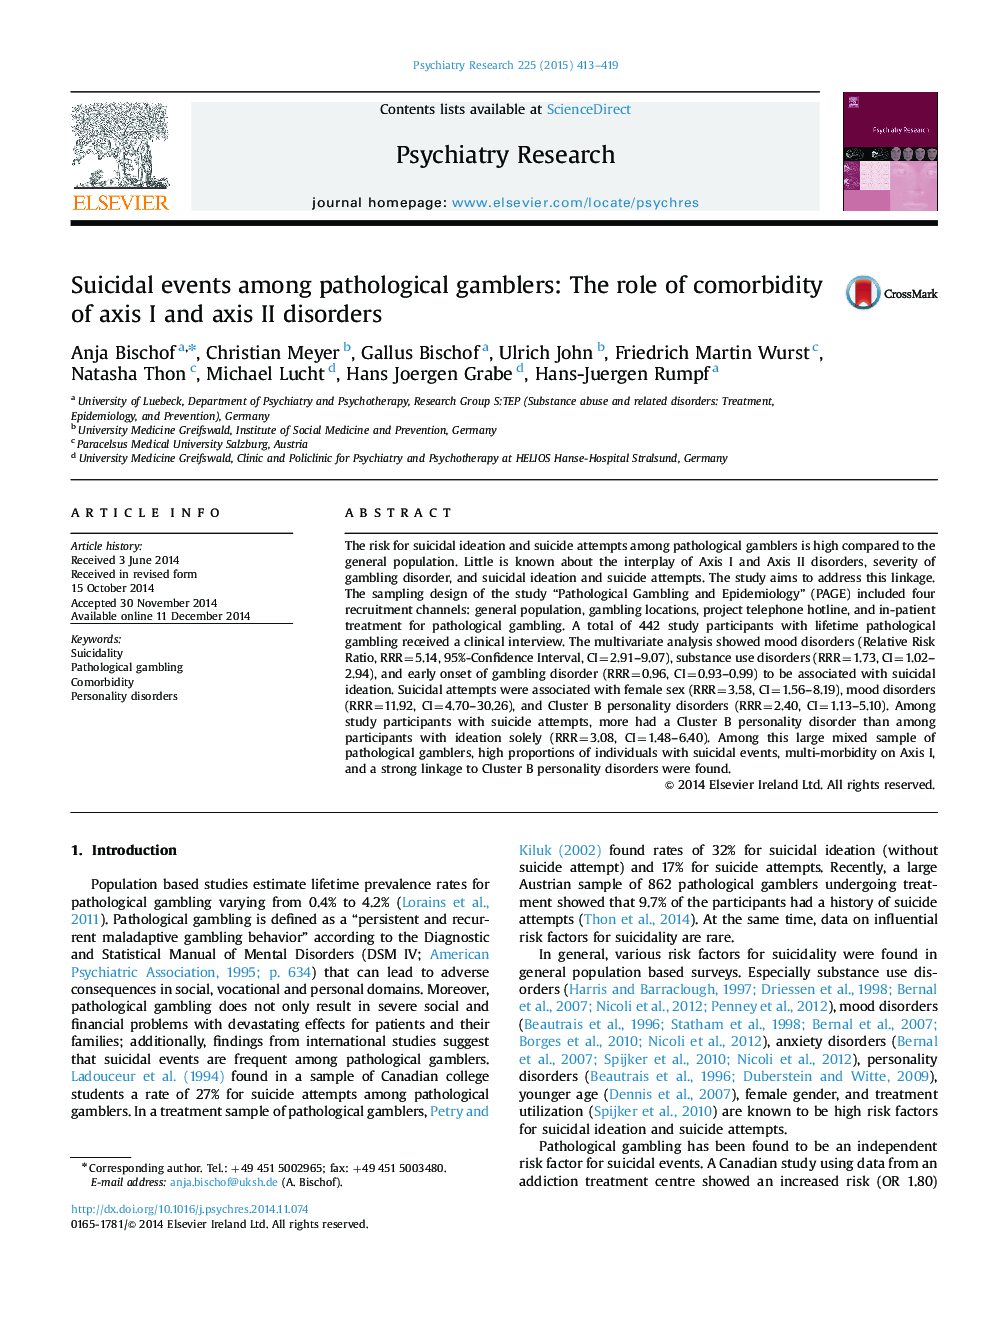 Suicidal events among pathological gamblers: The role of comorbidity of axis I and axis II disorders